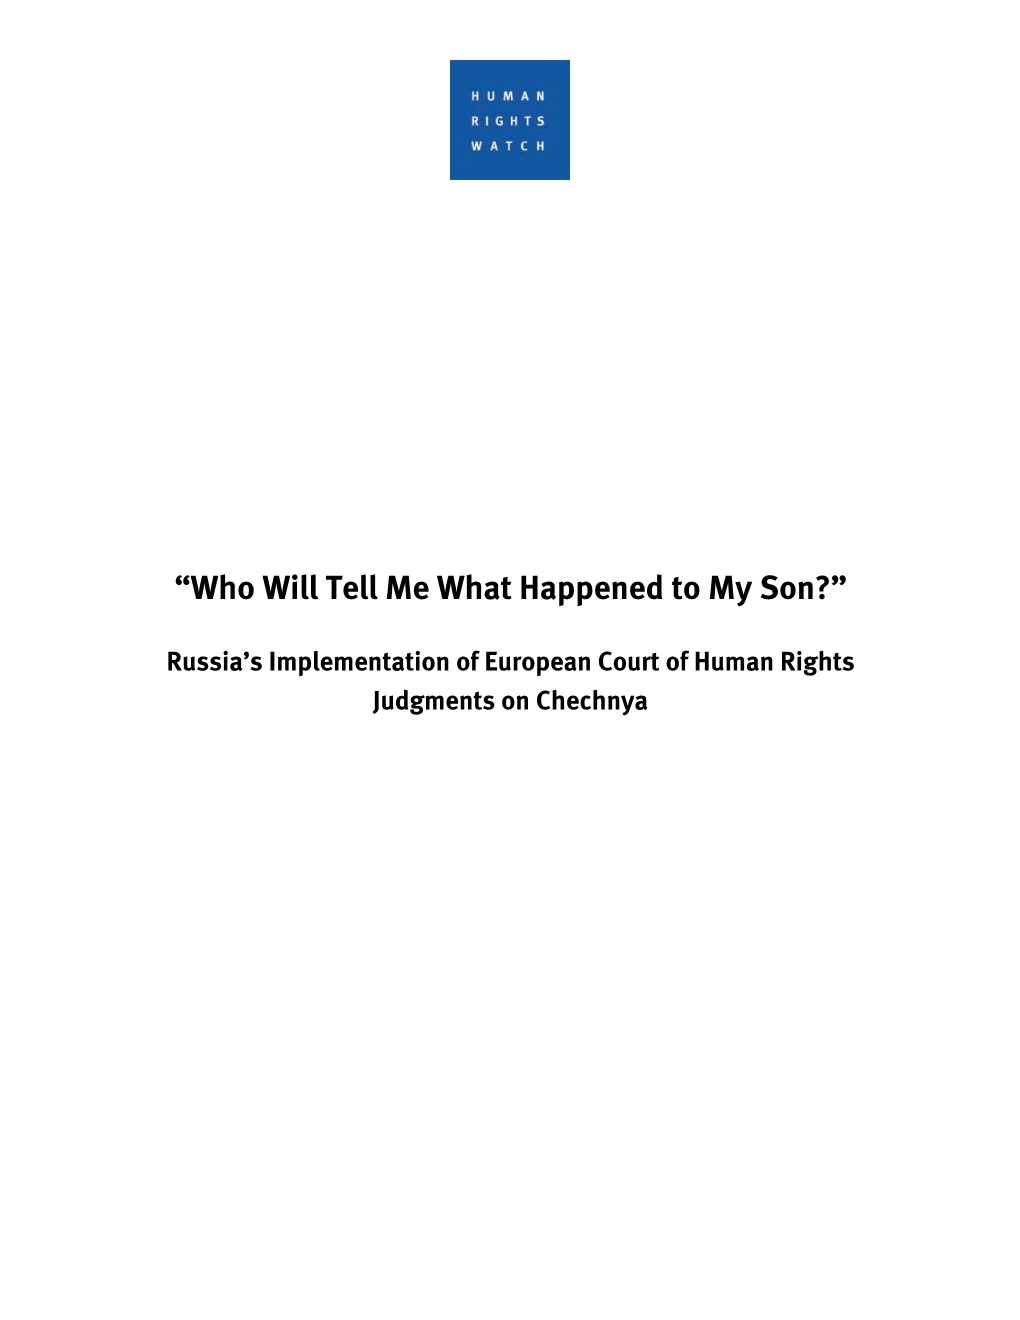 Russia's Implementation of European Court Of